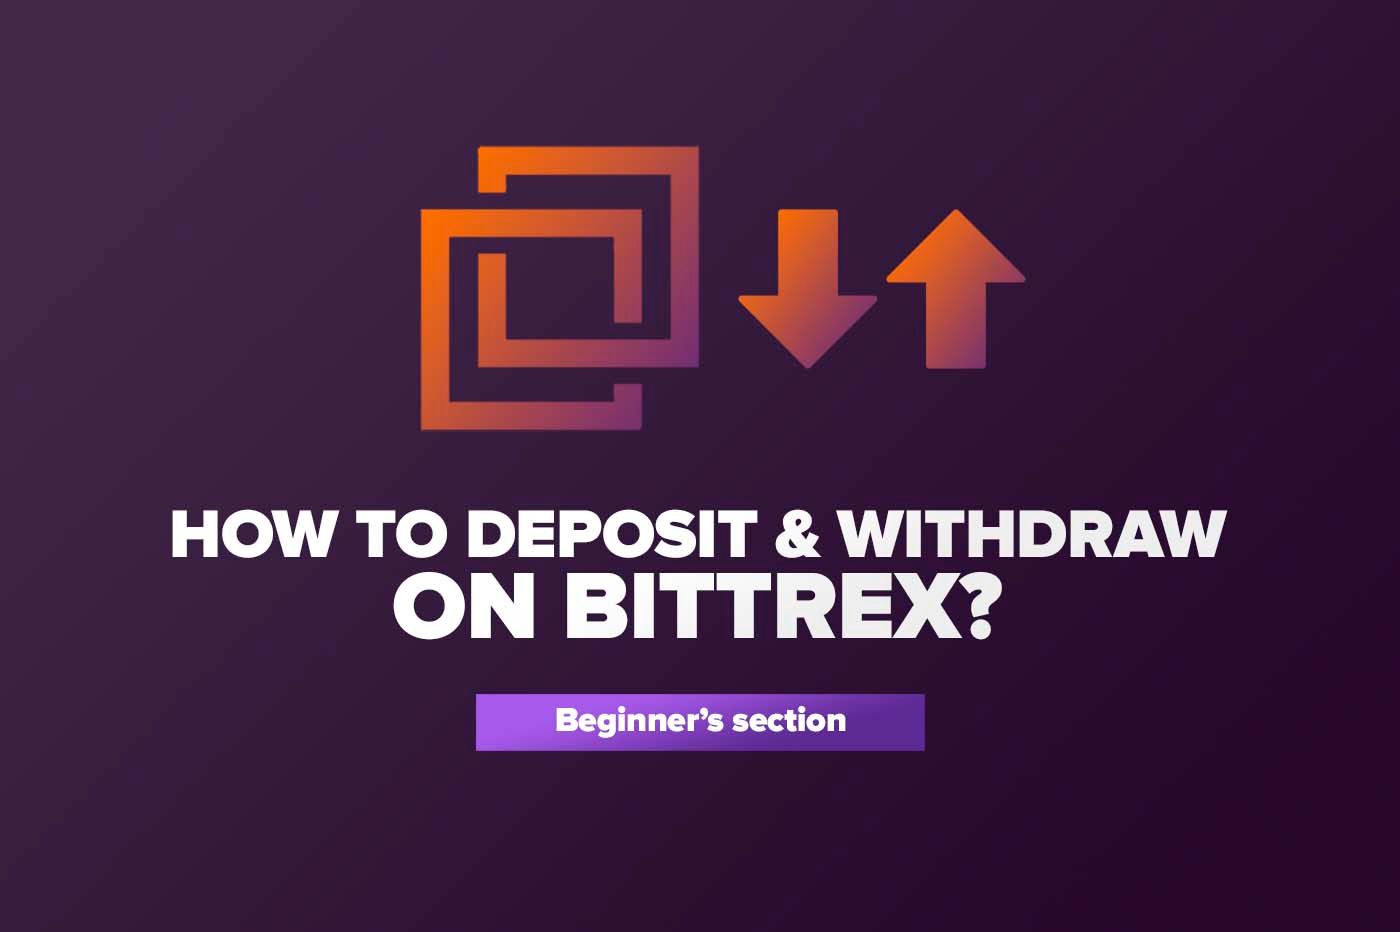 Article How to Deposit & Withdraw on Bittrex?